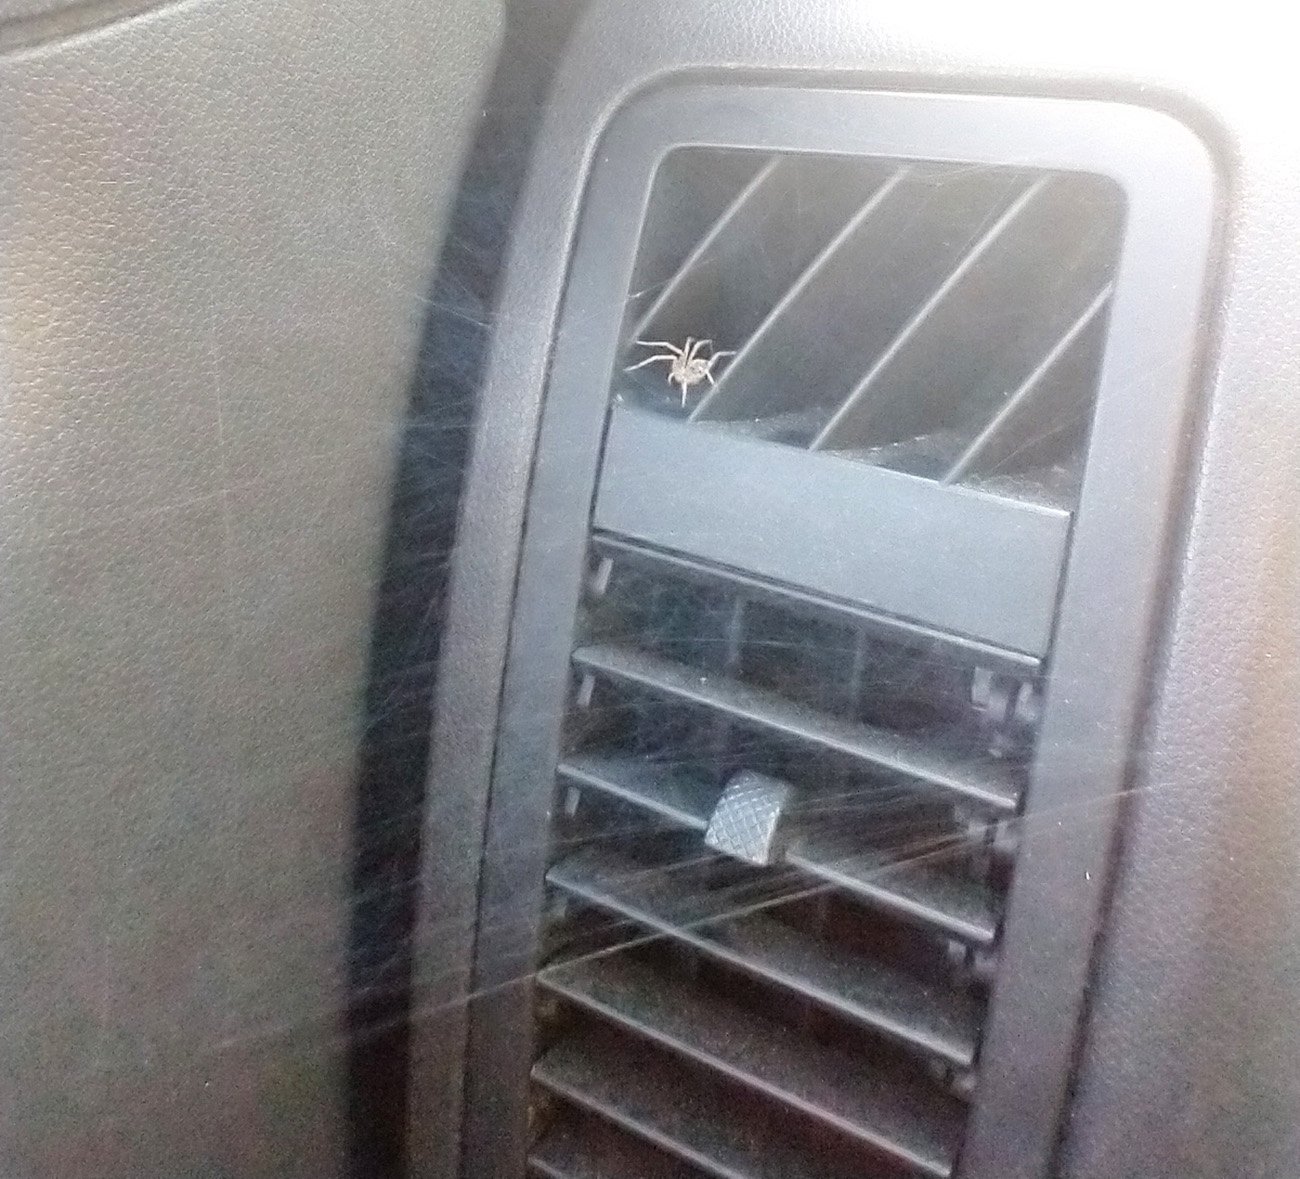 A little house spider snuck into my car and made this web overnight. Did not keep him.